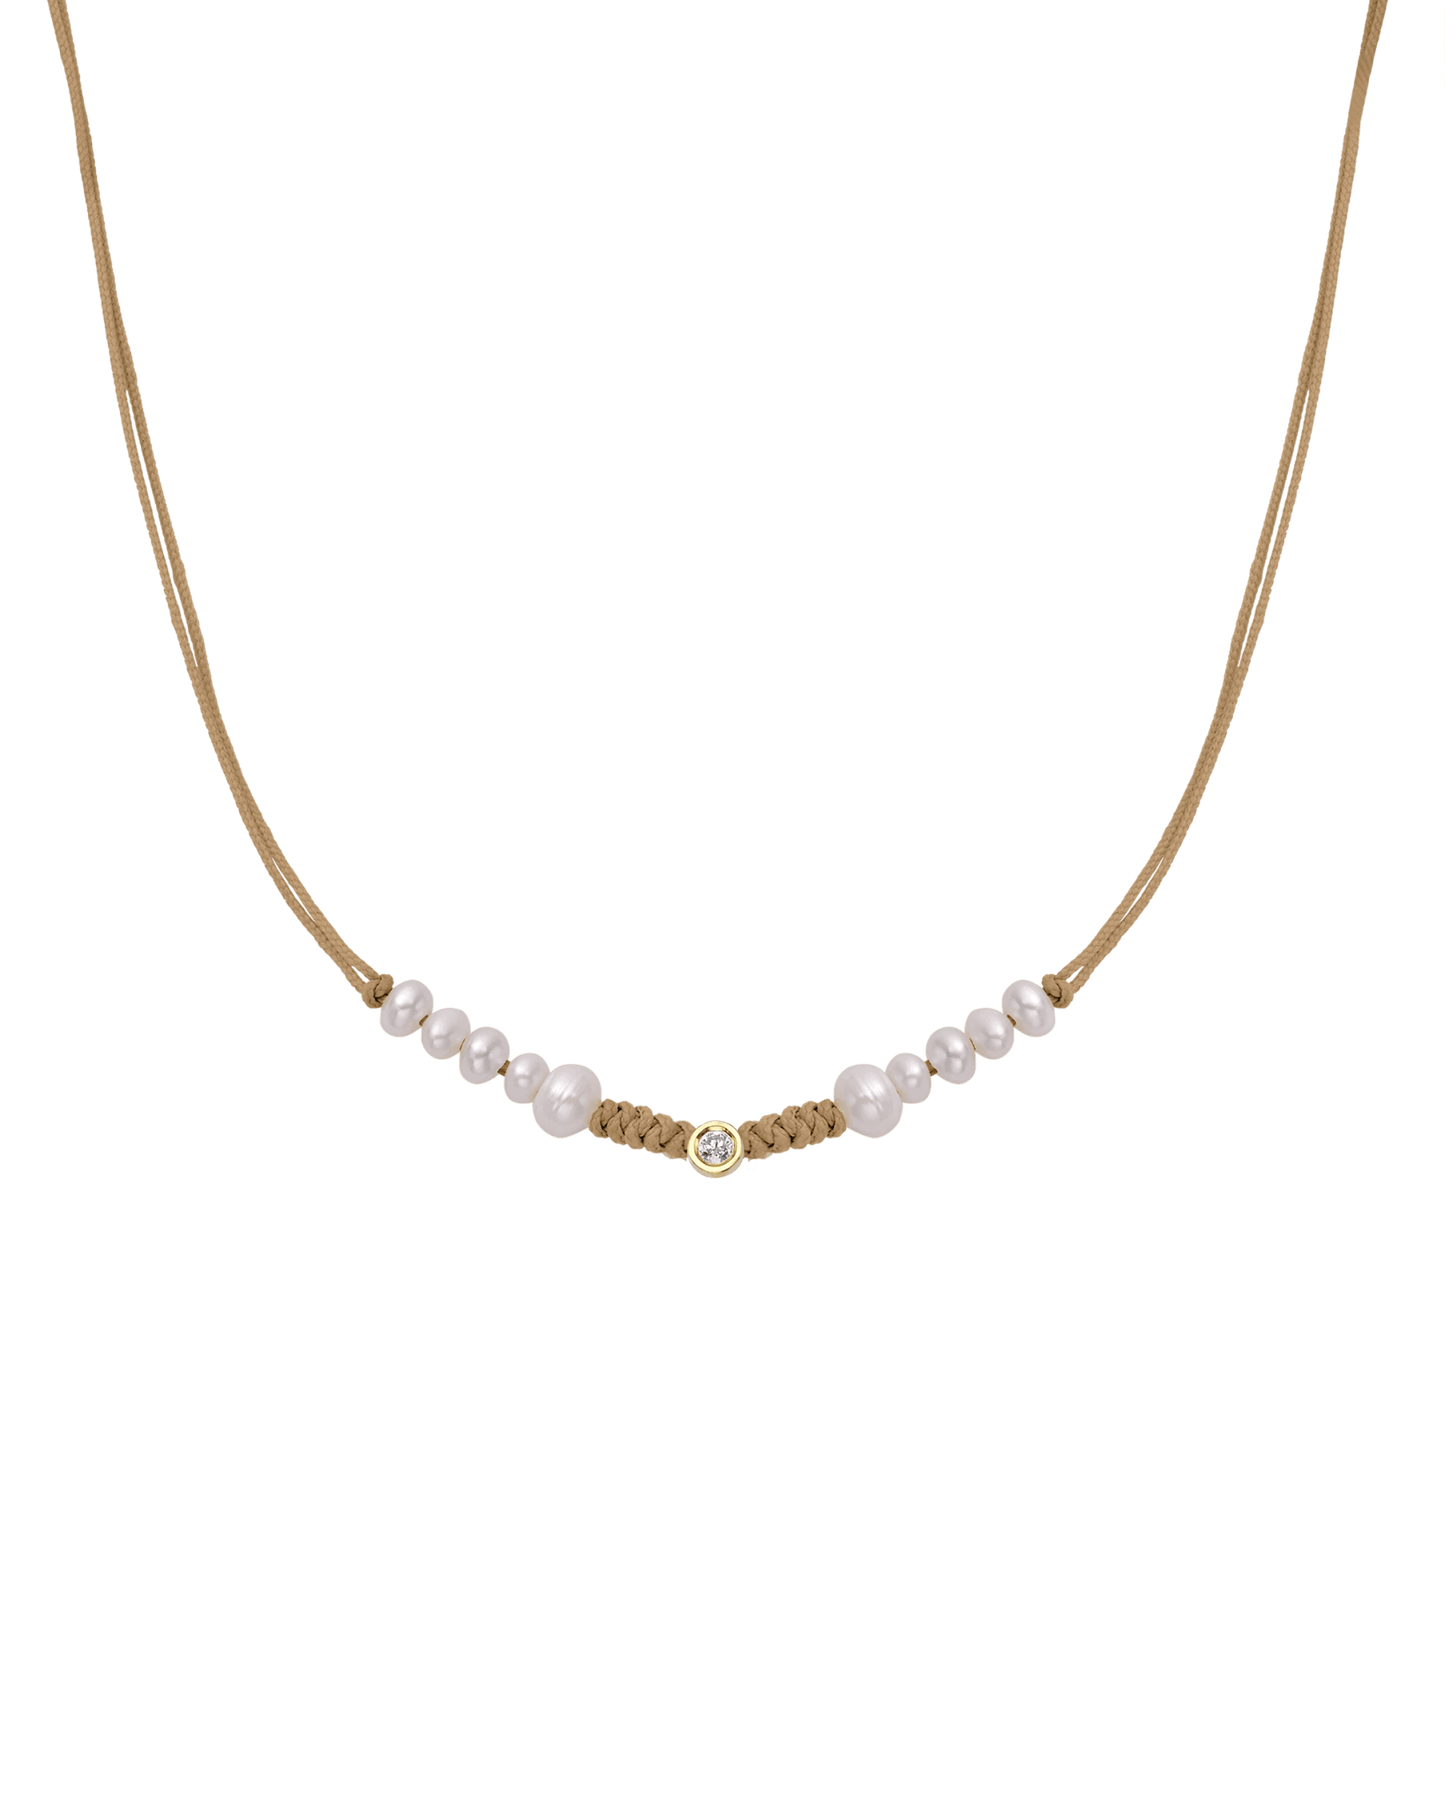 Ten Natural Pearl String of Love Necklace - 14K Yellow Gold Necklaces 14K Solid Gold Camel Medium: 0.04ct 